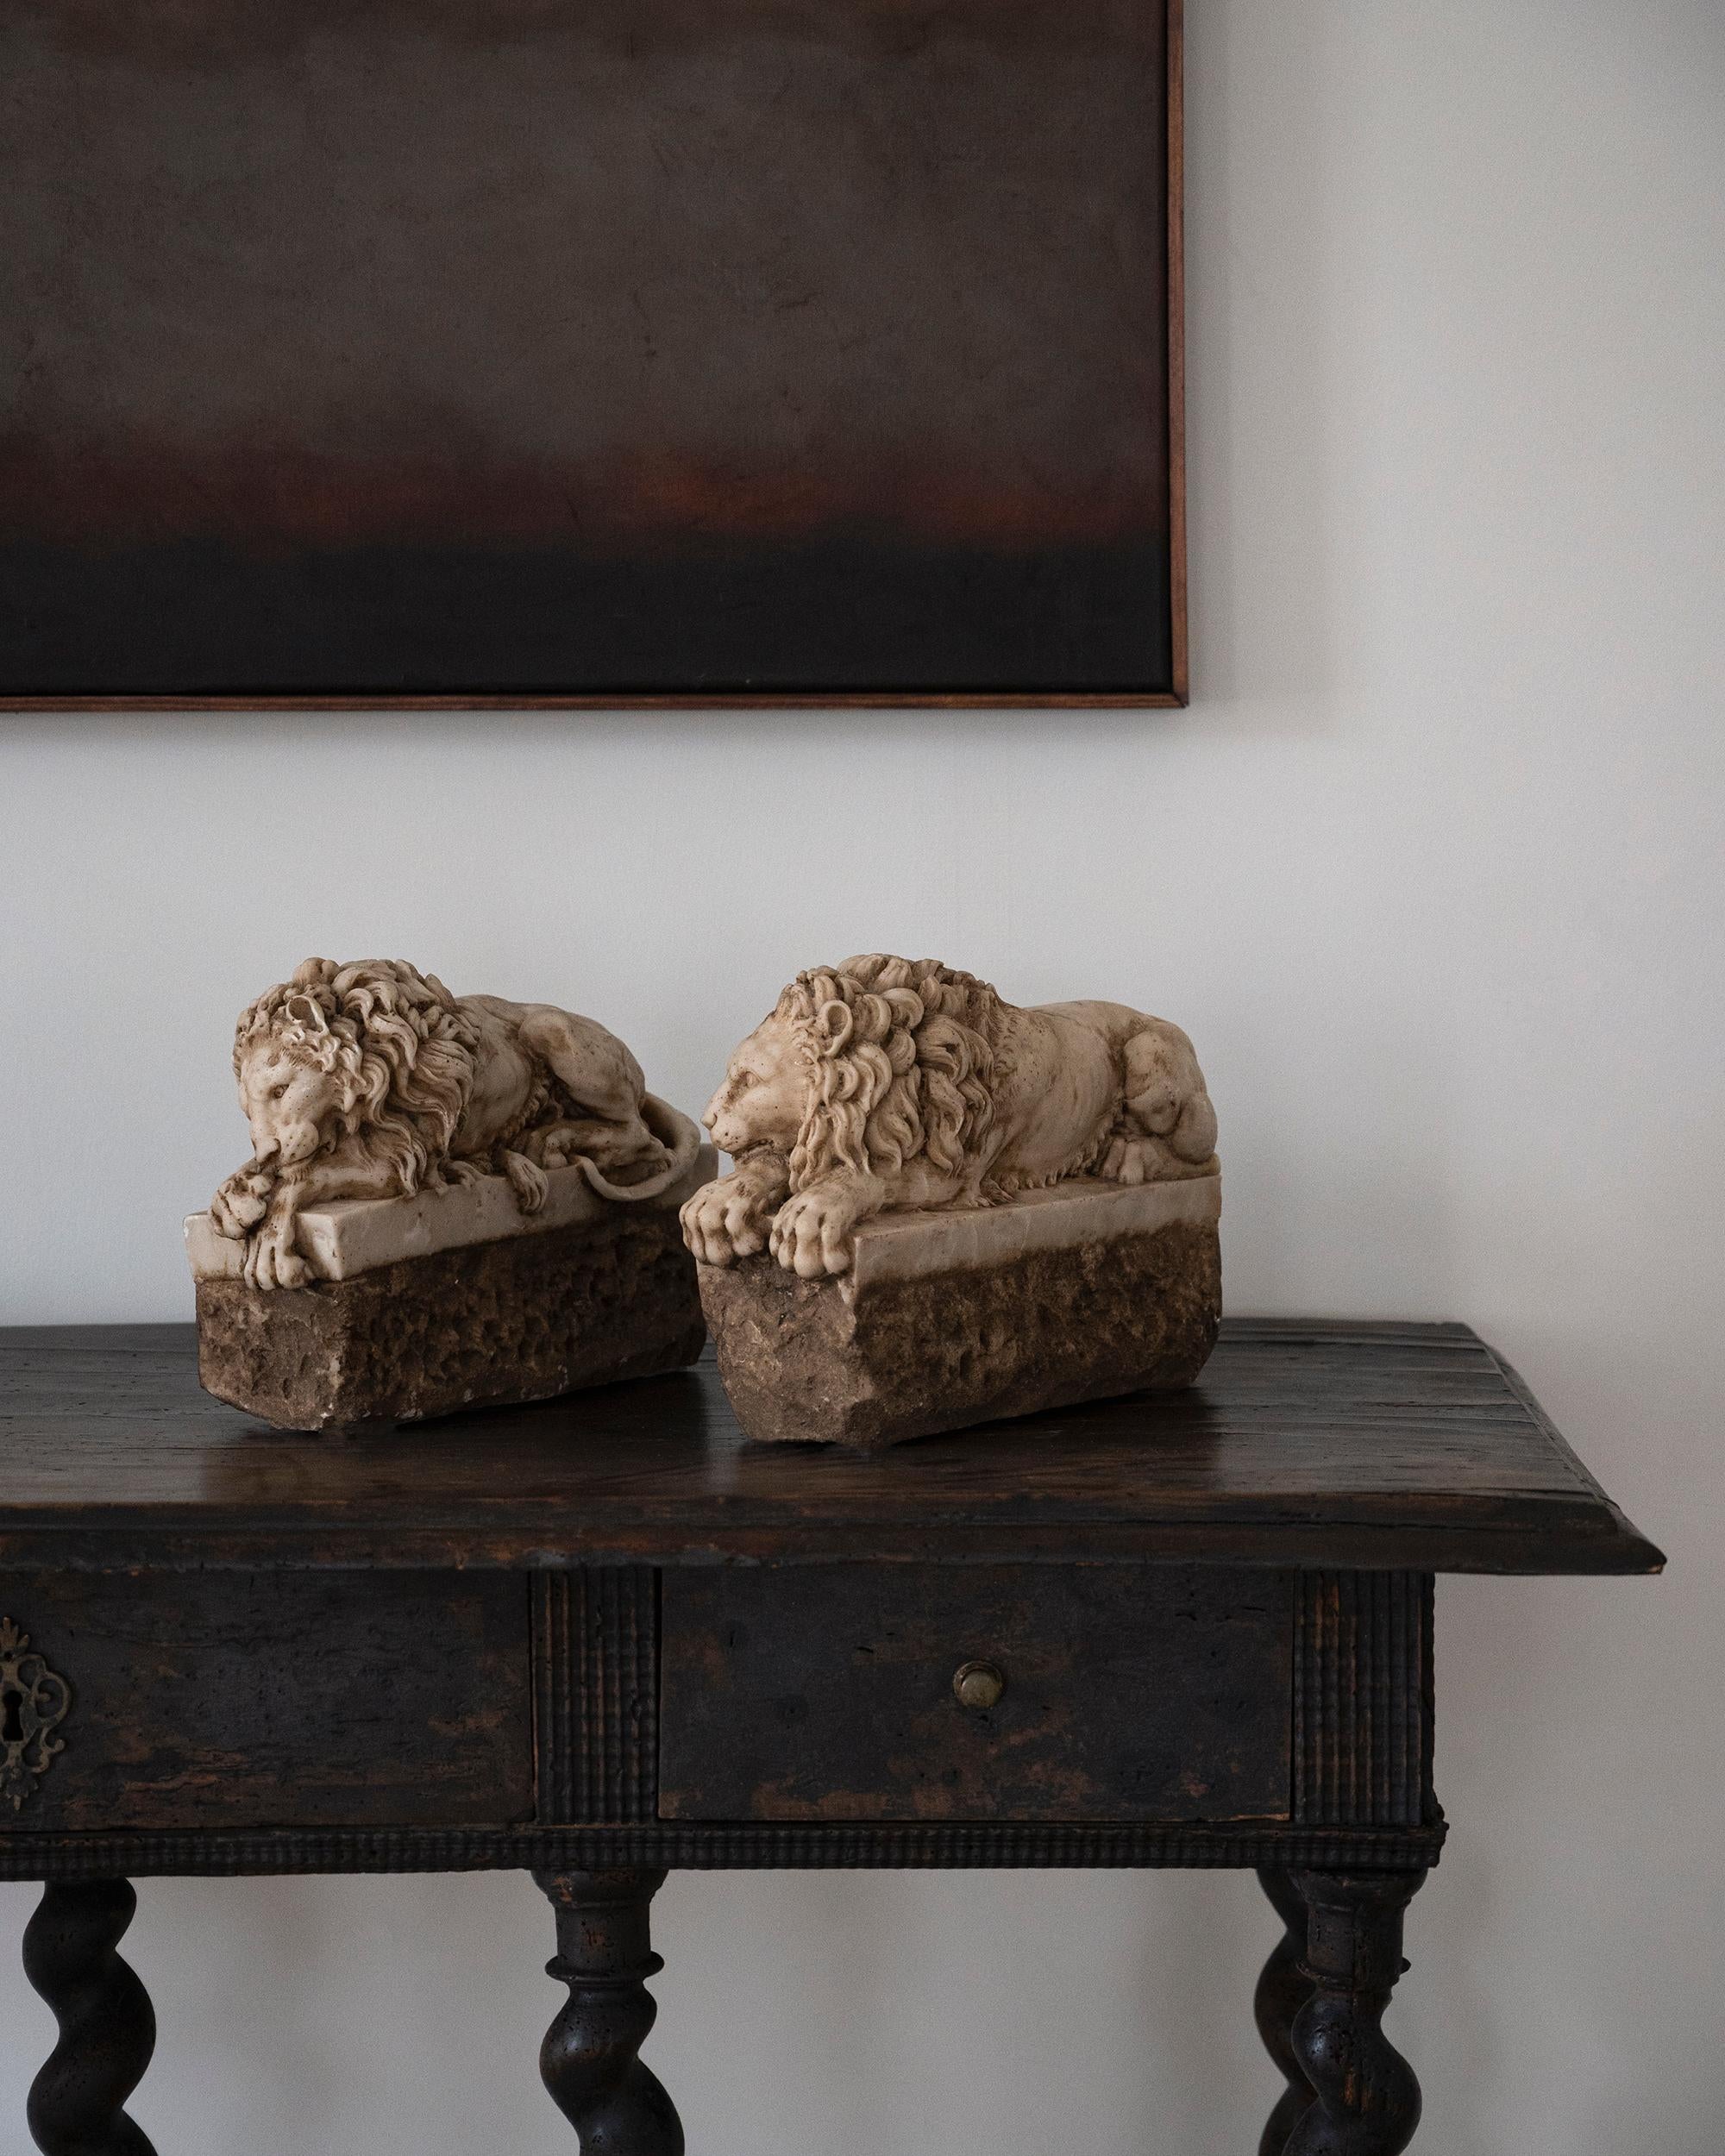 Fine pair of Italian mid 19th Century alabaster stone lions with great patination. Based on the monumental lions by the greatest Italian neoclassical sculptor. Antonio Canova (1757-1822). 

Canova Lions refers to the pair of copies of lion